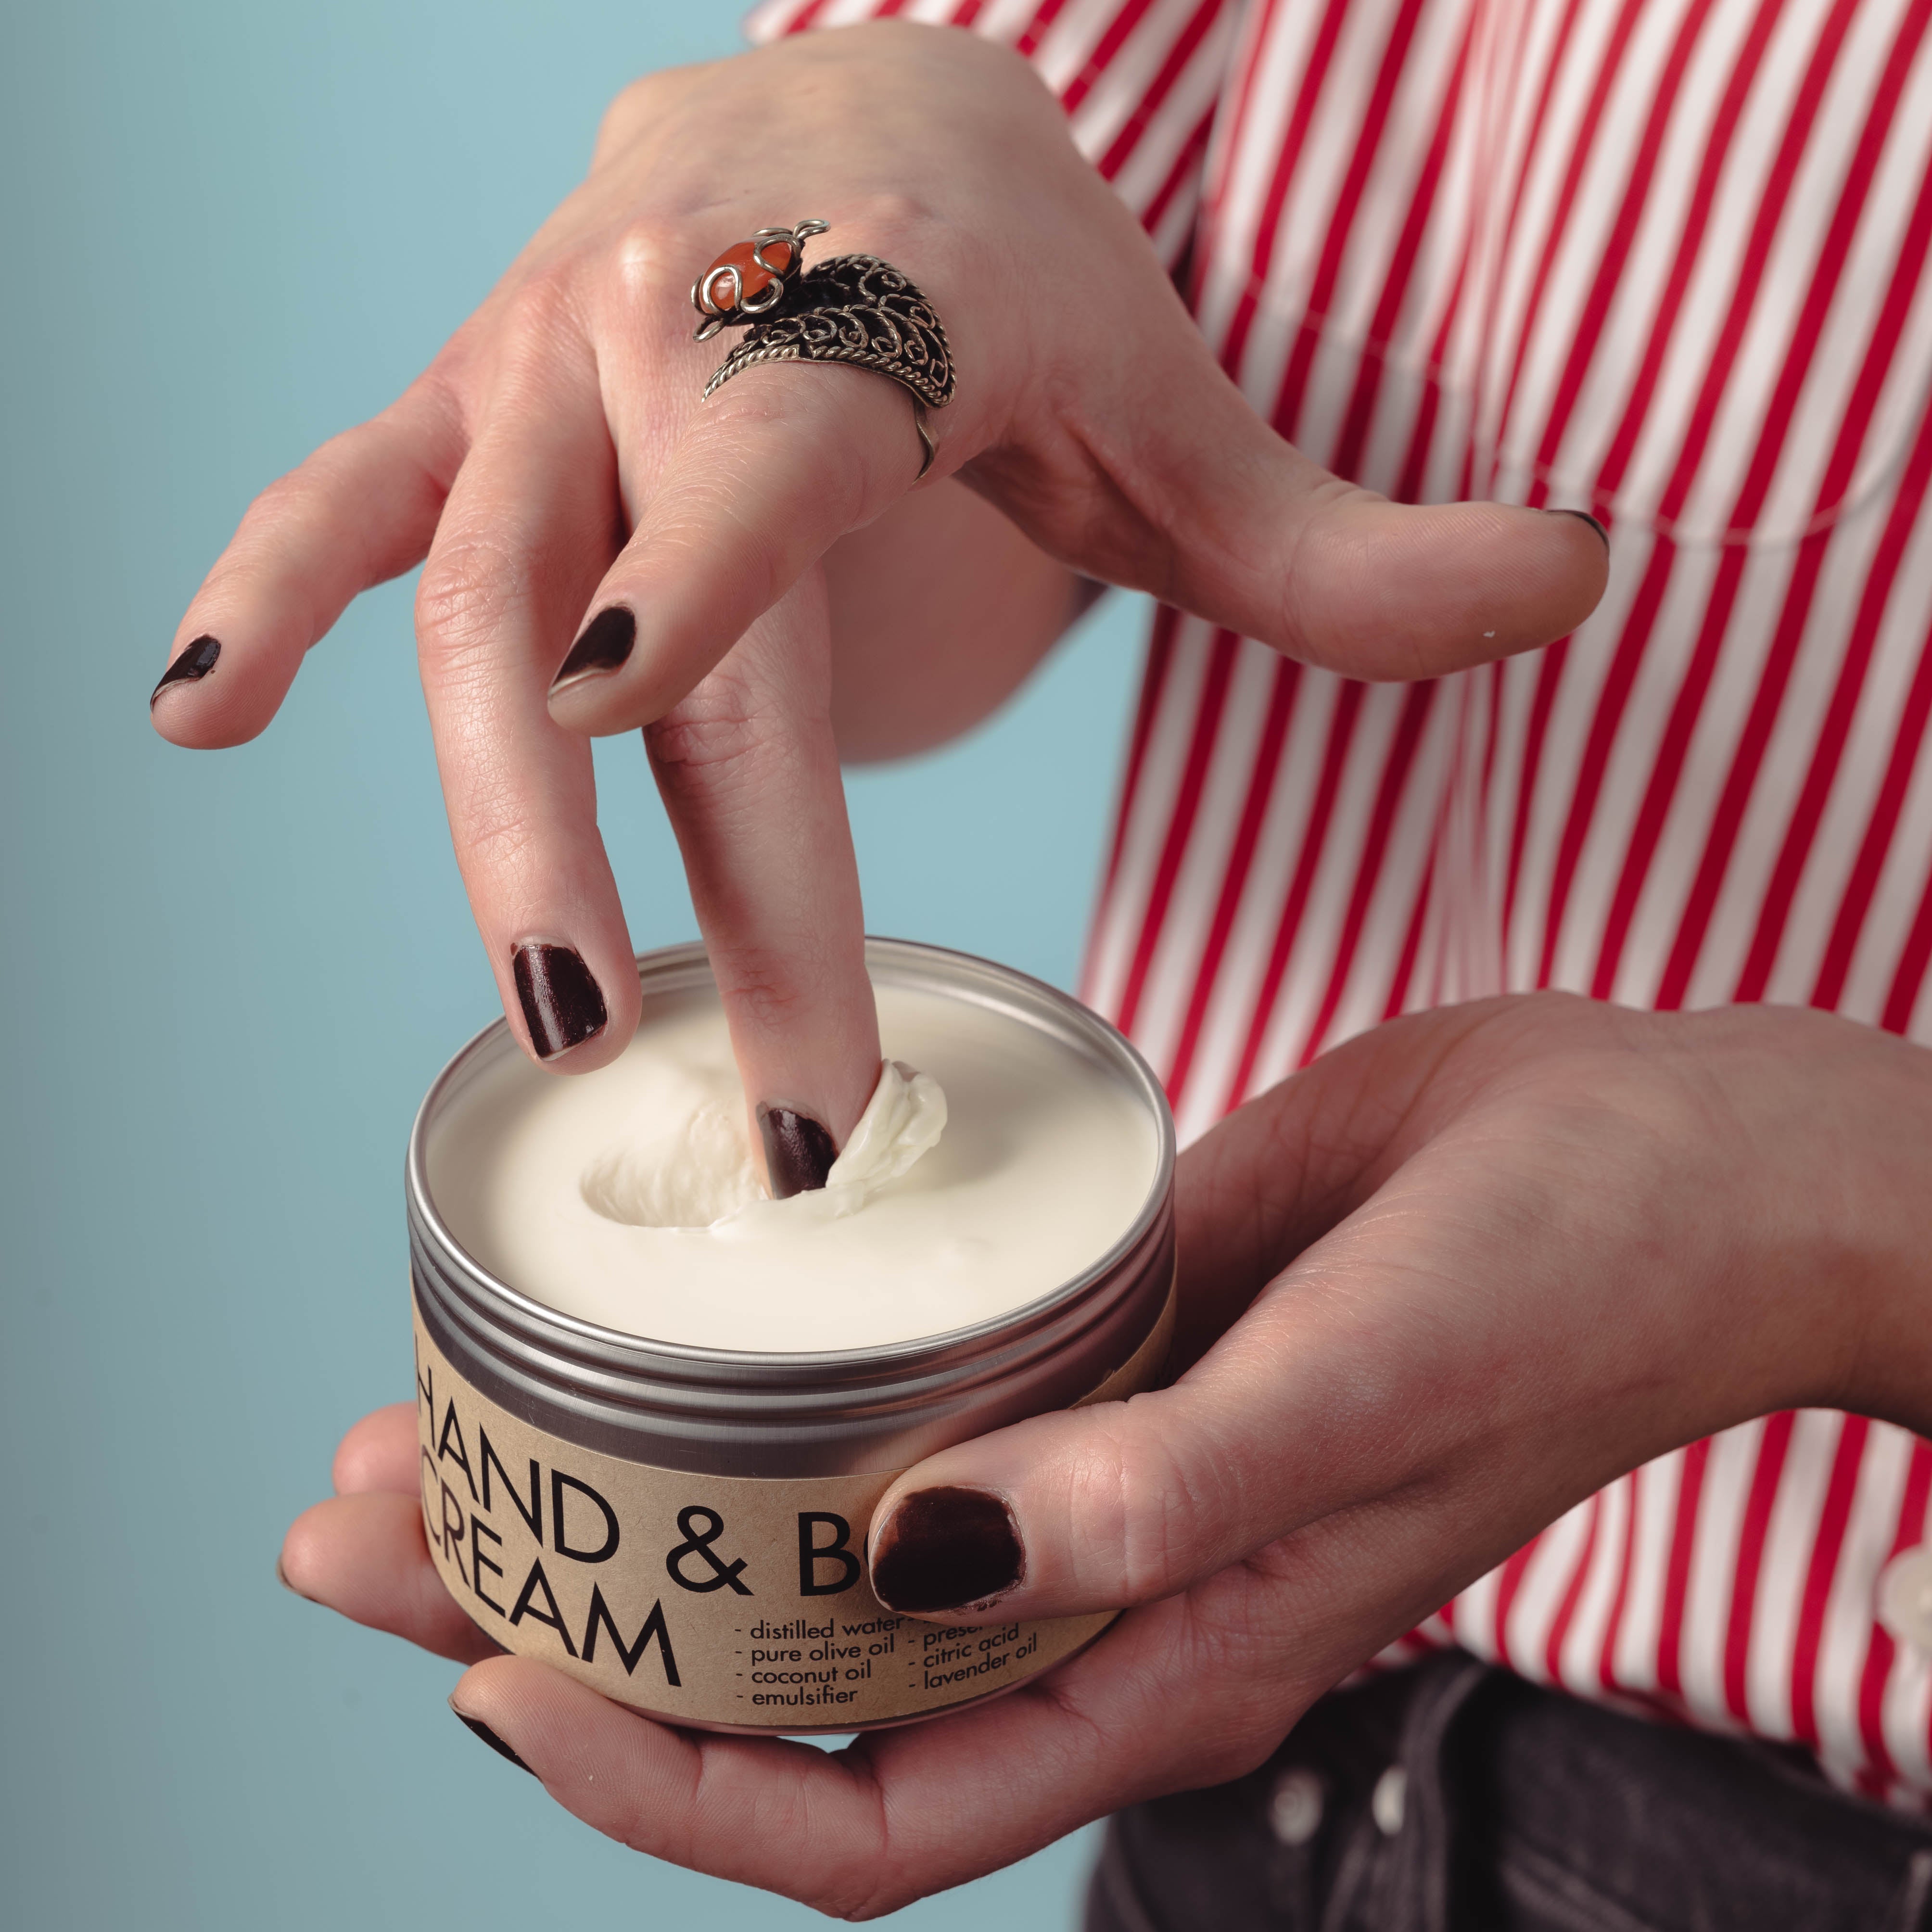 Megan dips a finger into a fresh tin of Hand & Body Cream, scooping out a dollop to use.